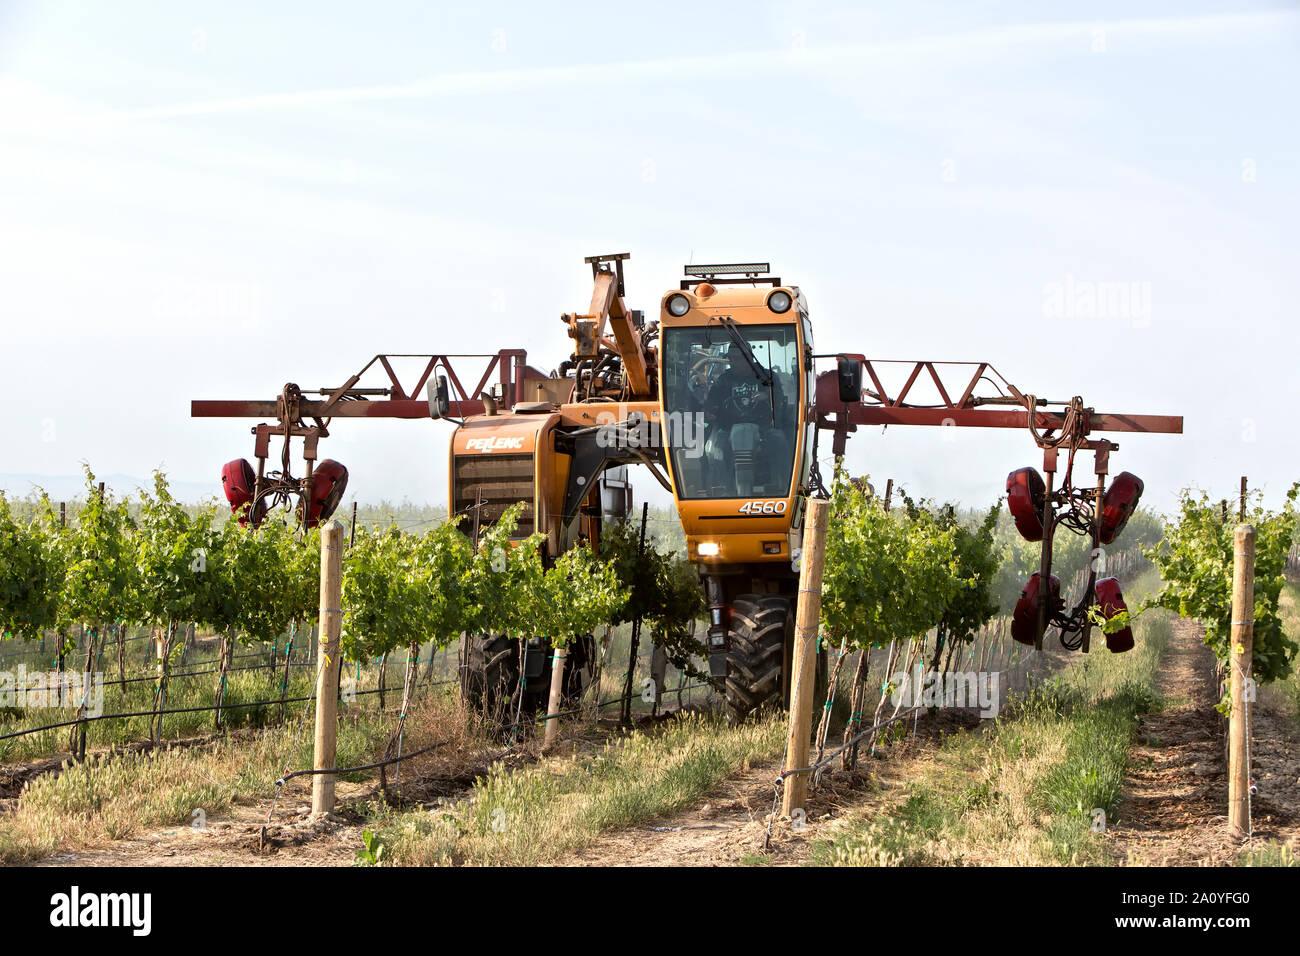 Pellenc 4560  multi-function over the row tractor with 3 Row Sprayer attachment spraying the vineyard for mildew protection. Stock Photo